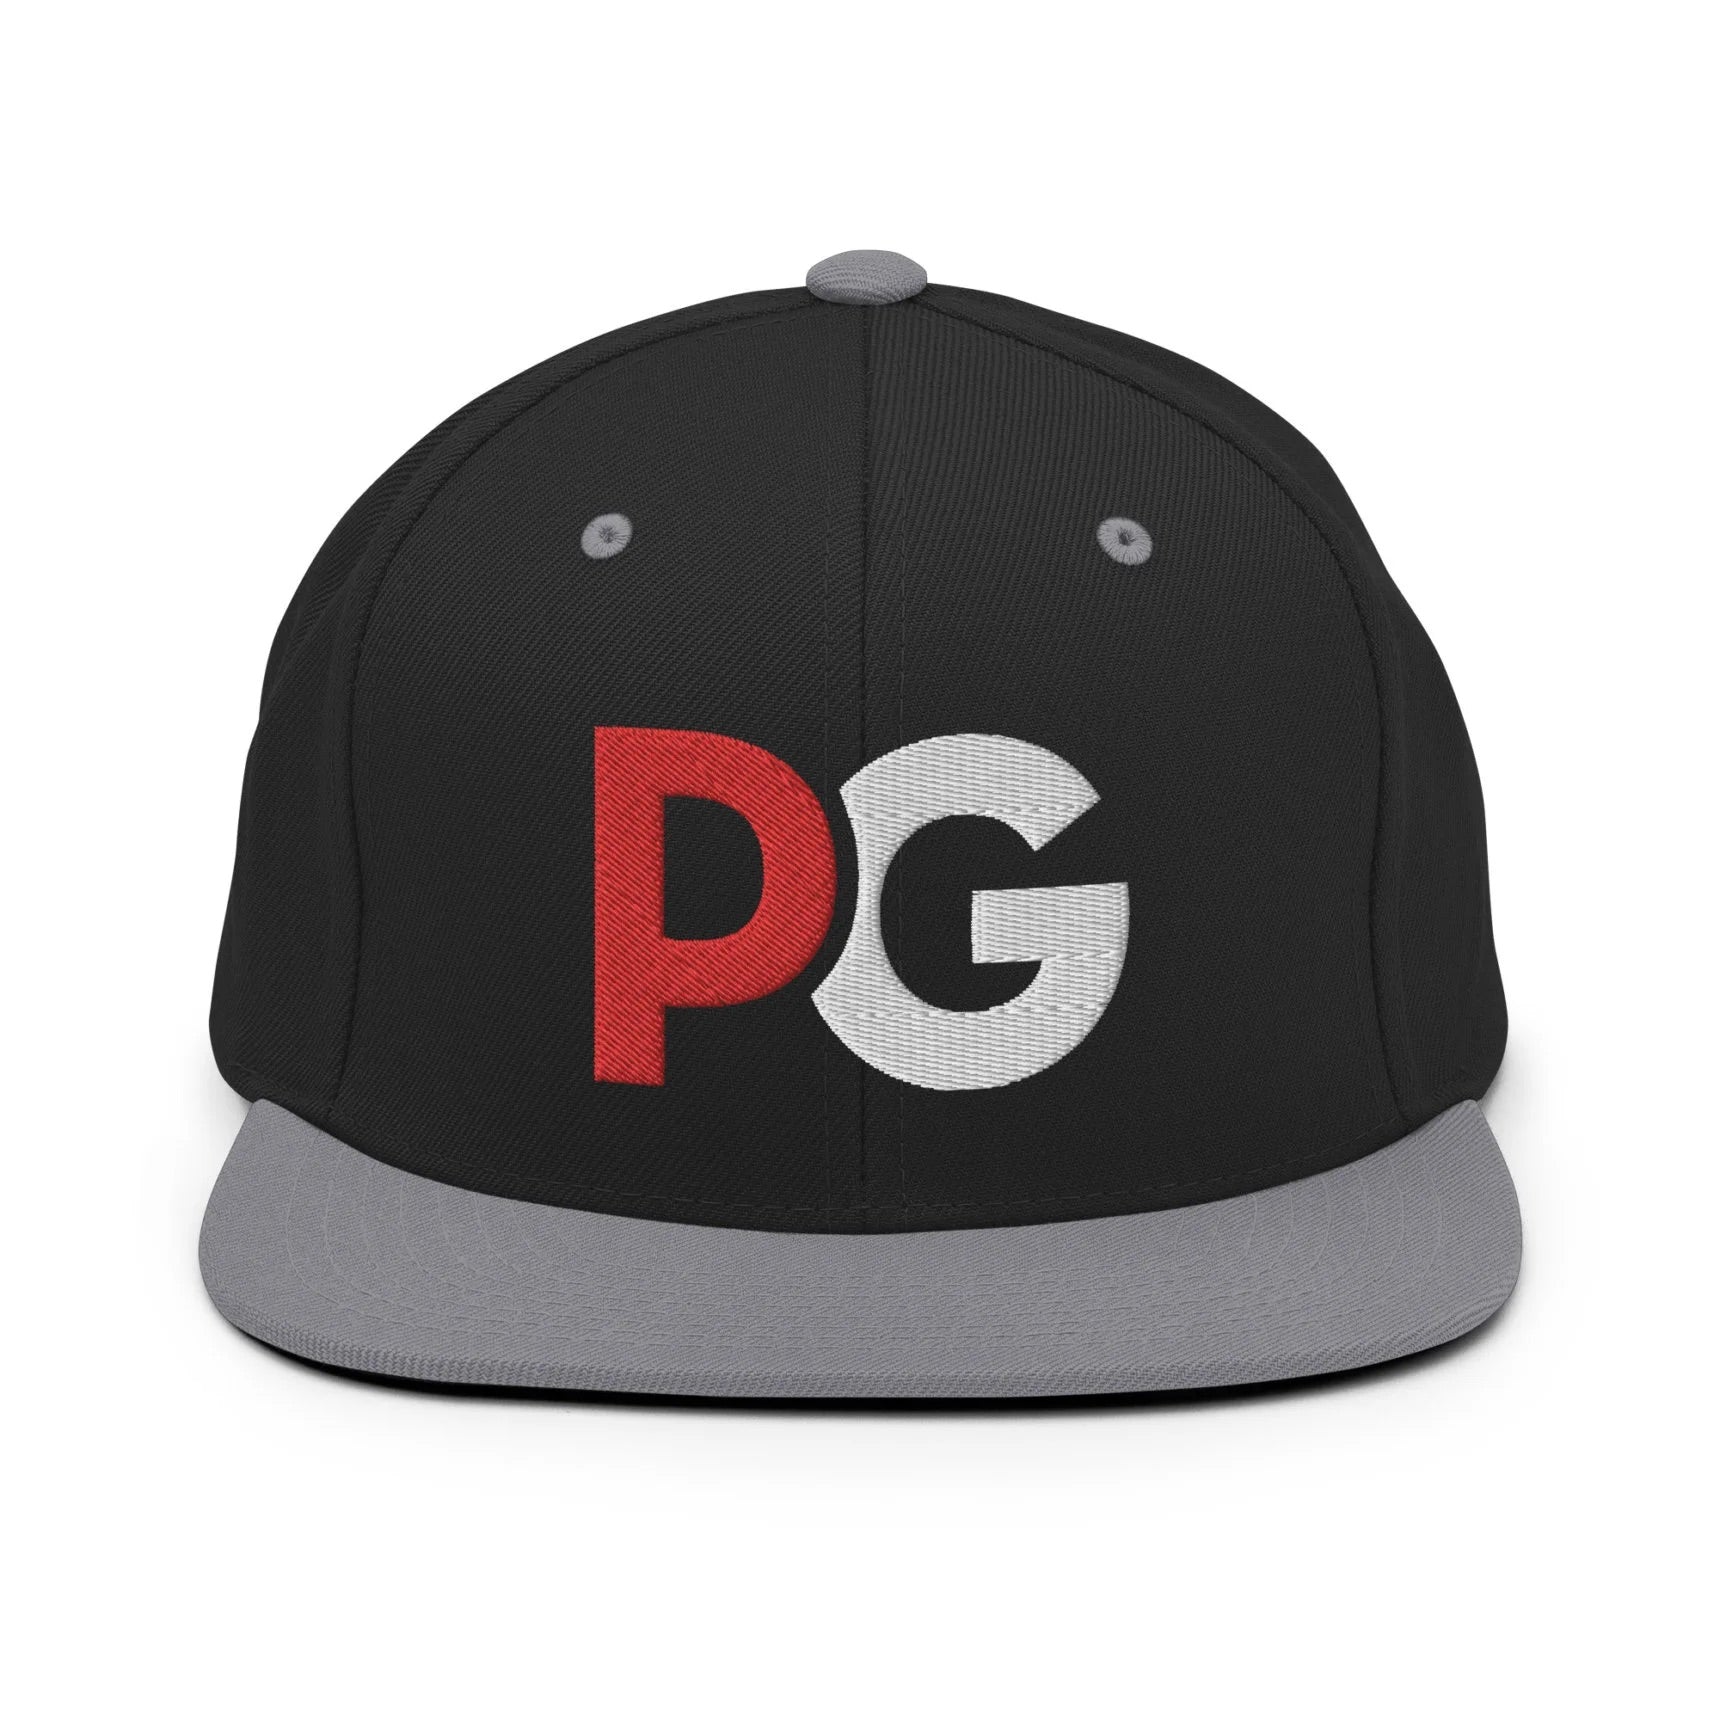 ProfesorGamingTV Snapback Hat by ShowZone in black with grey brim and accents